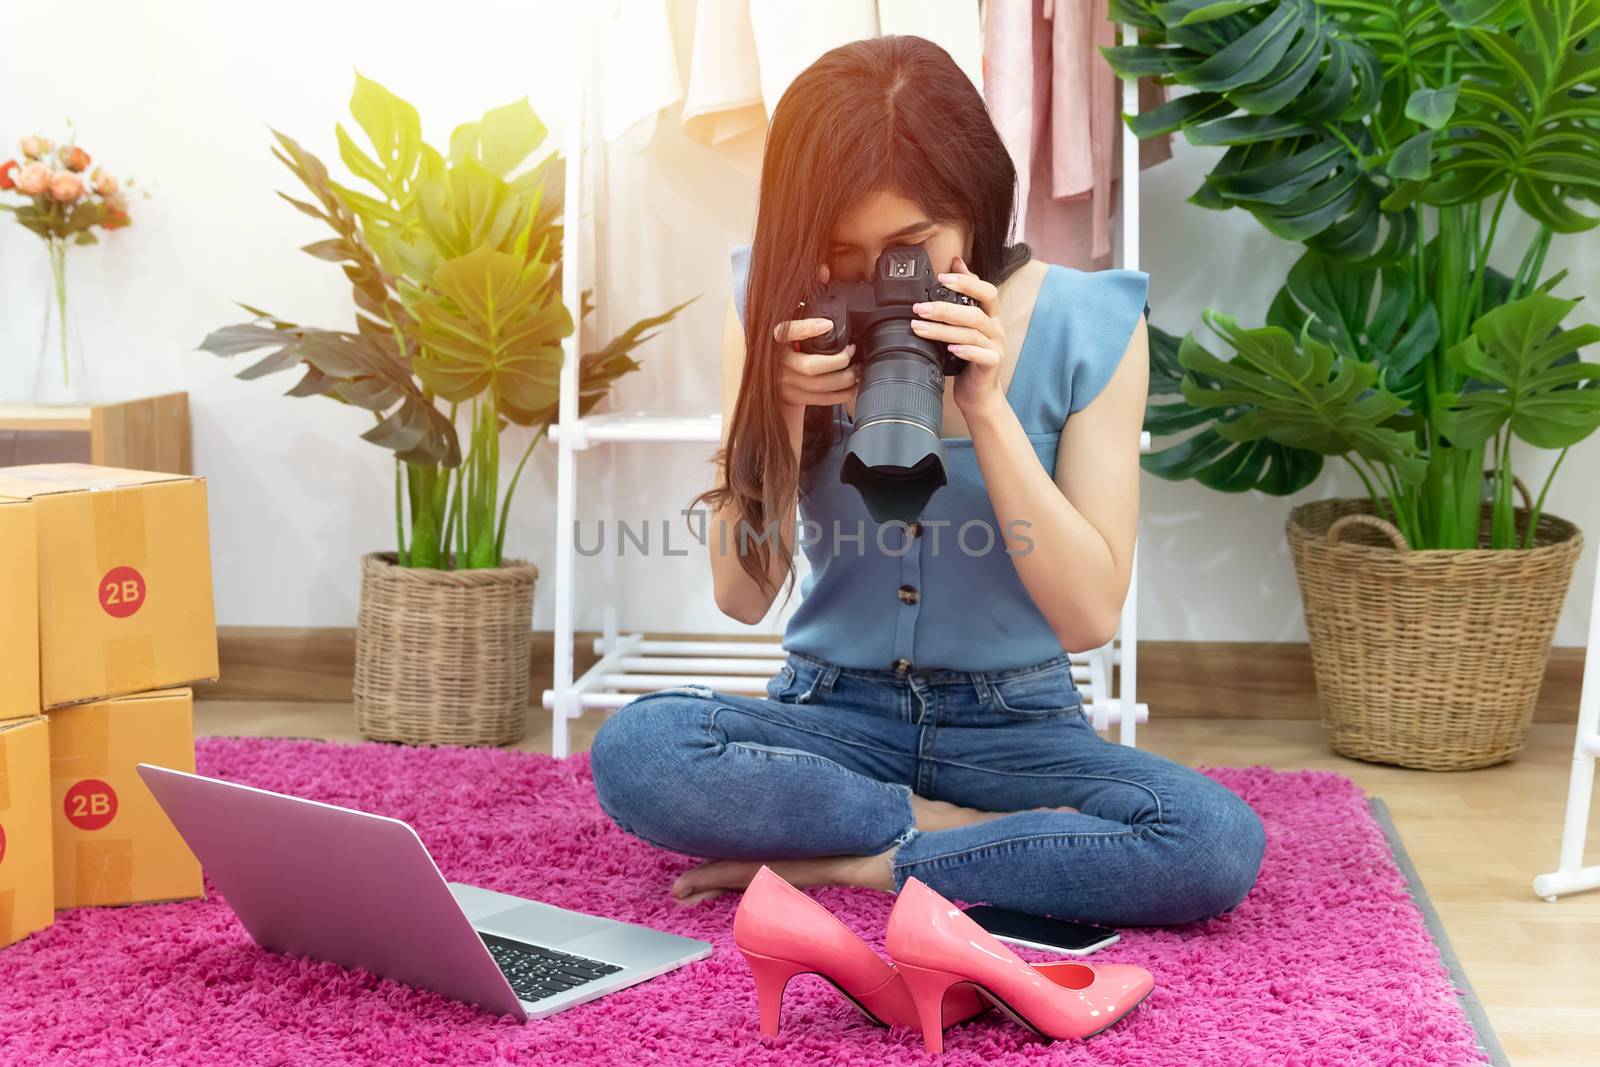 Asian woman take photo of shoe, fashion accessories for upload and selling online on website with many parcel box for shipping delivery. owner of small business working from home during self isolation